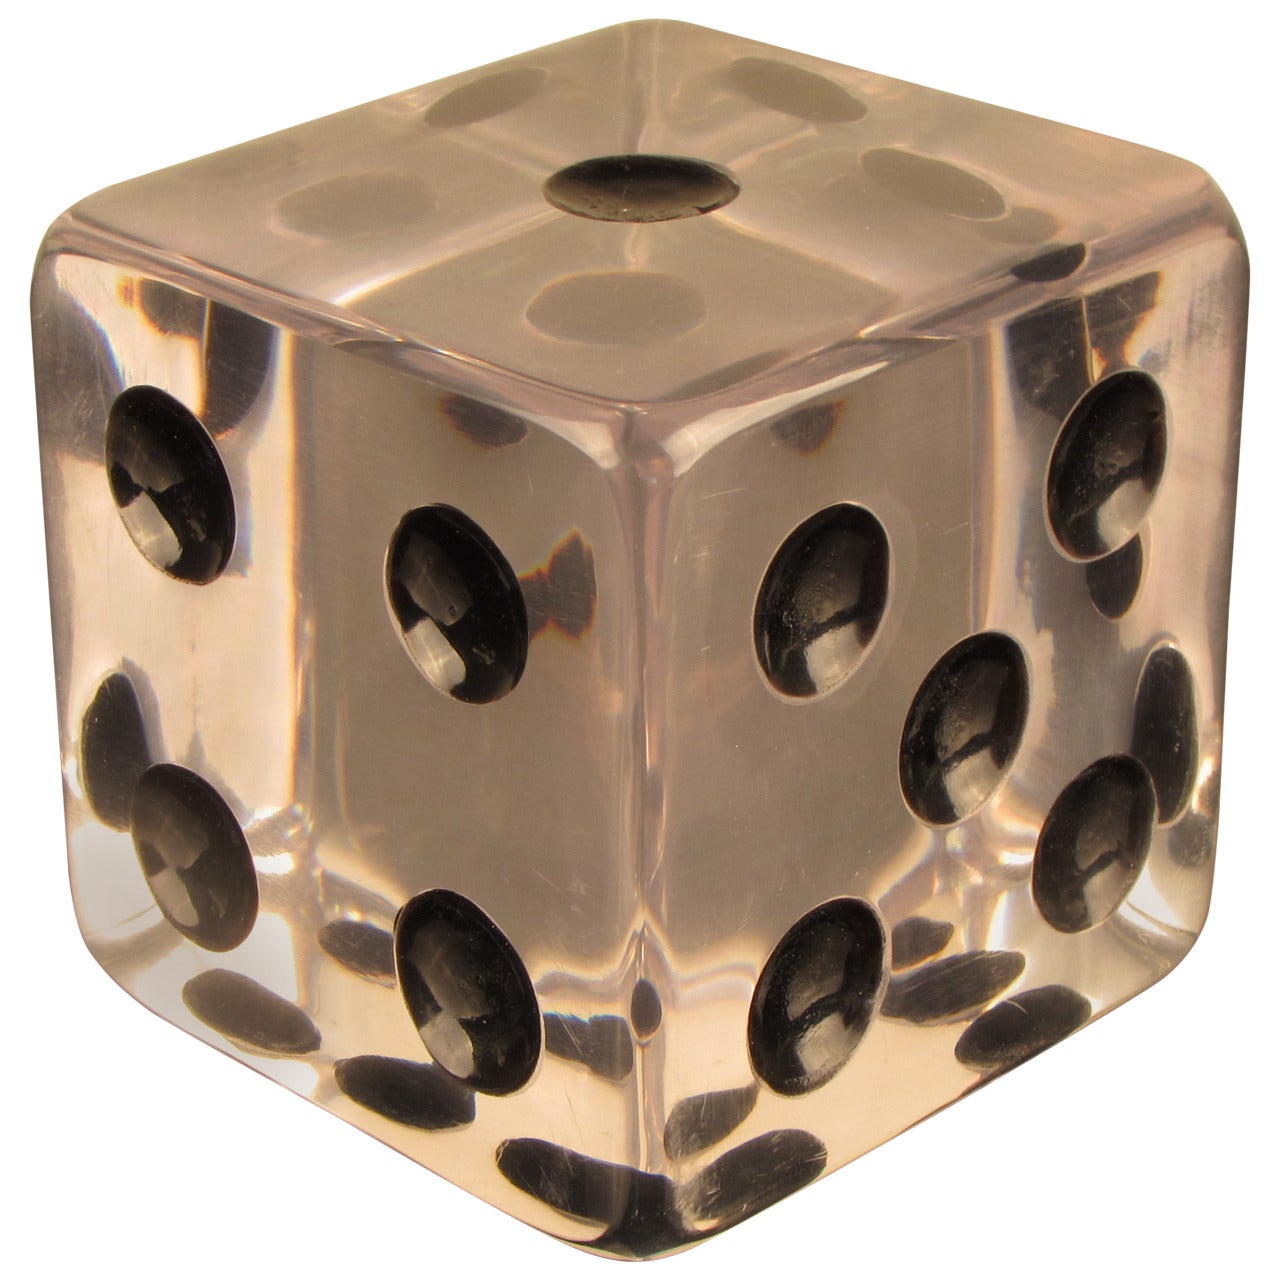 Extraordinary Large Lucite Dice Bookend or Paperweight